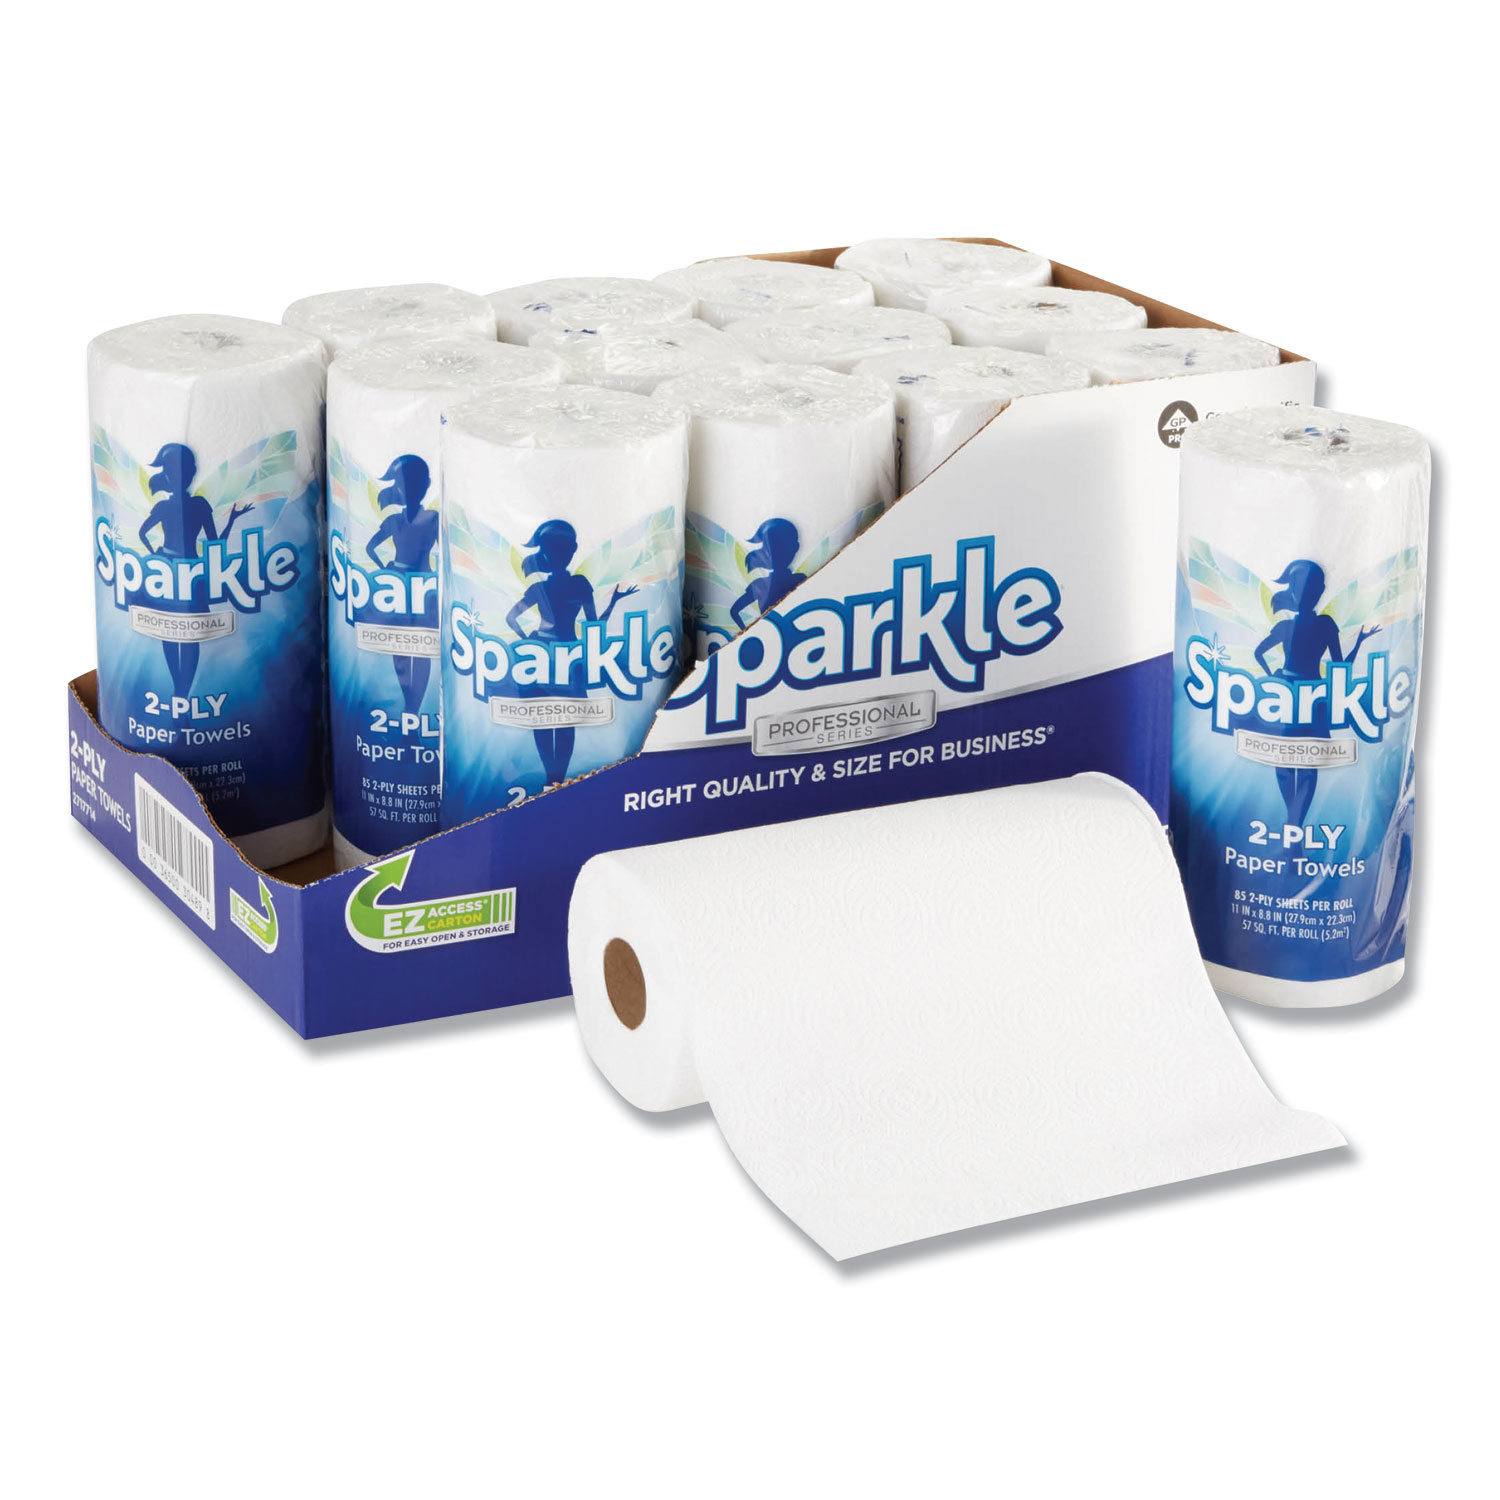  Georgia Pacific Professional 2717714 Sparkle ps Perforated Paper Towel, White, 8 4/5 x 11, 85/Roll, 15 Roll/Carton (GPC2717714) 